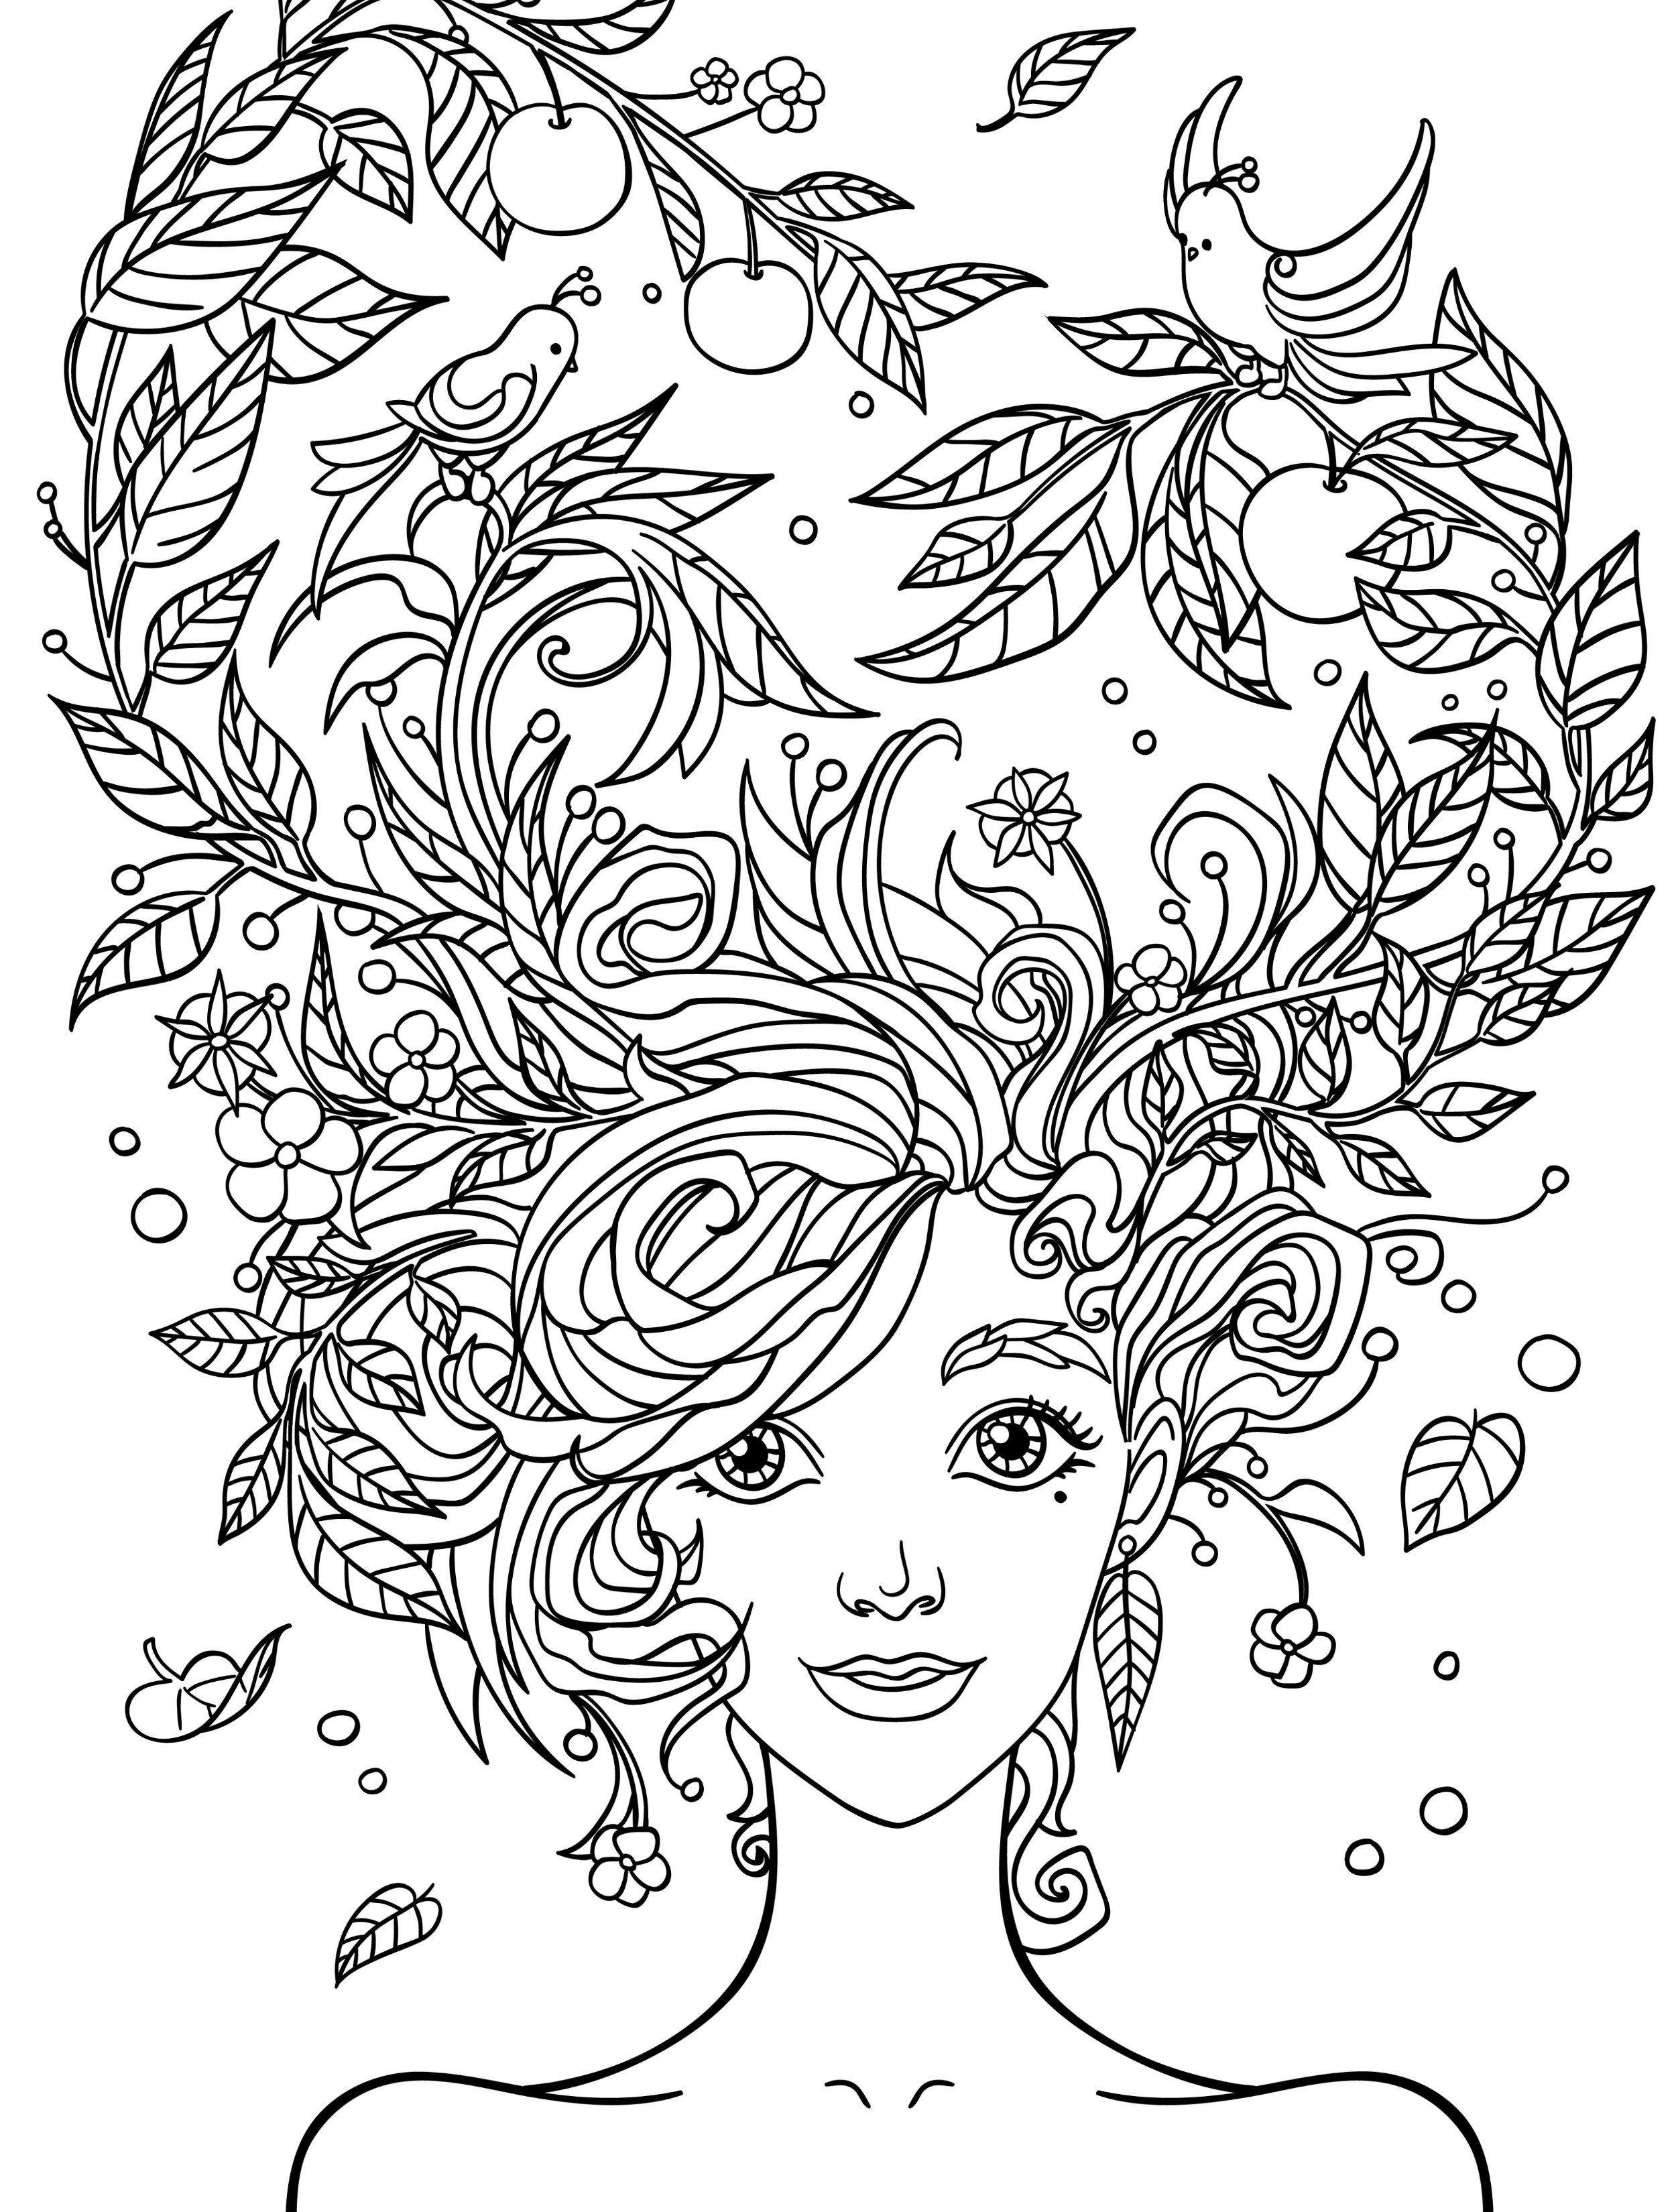 Coloring Pages Of Girls For Adults
 10 Crazy Hair Adult Coloring Pages Page 5 of 12 Nerdy